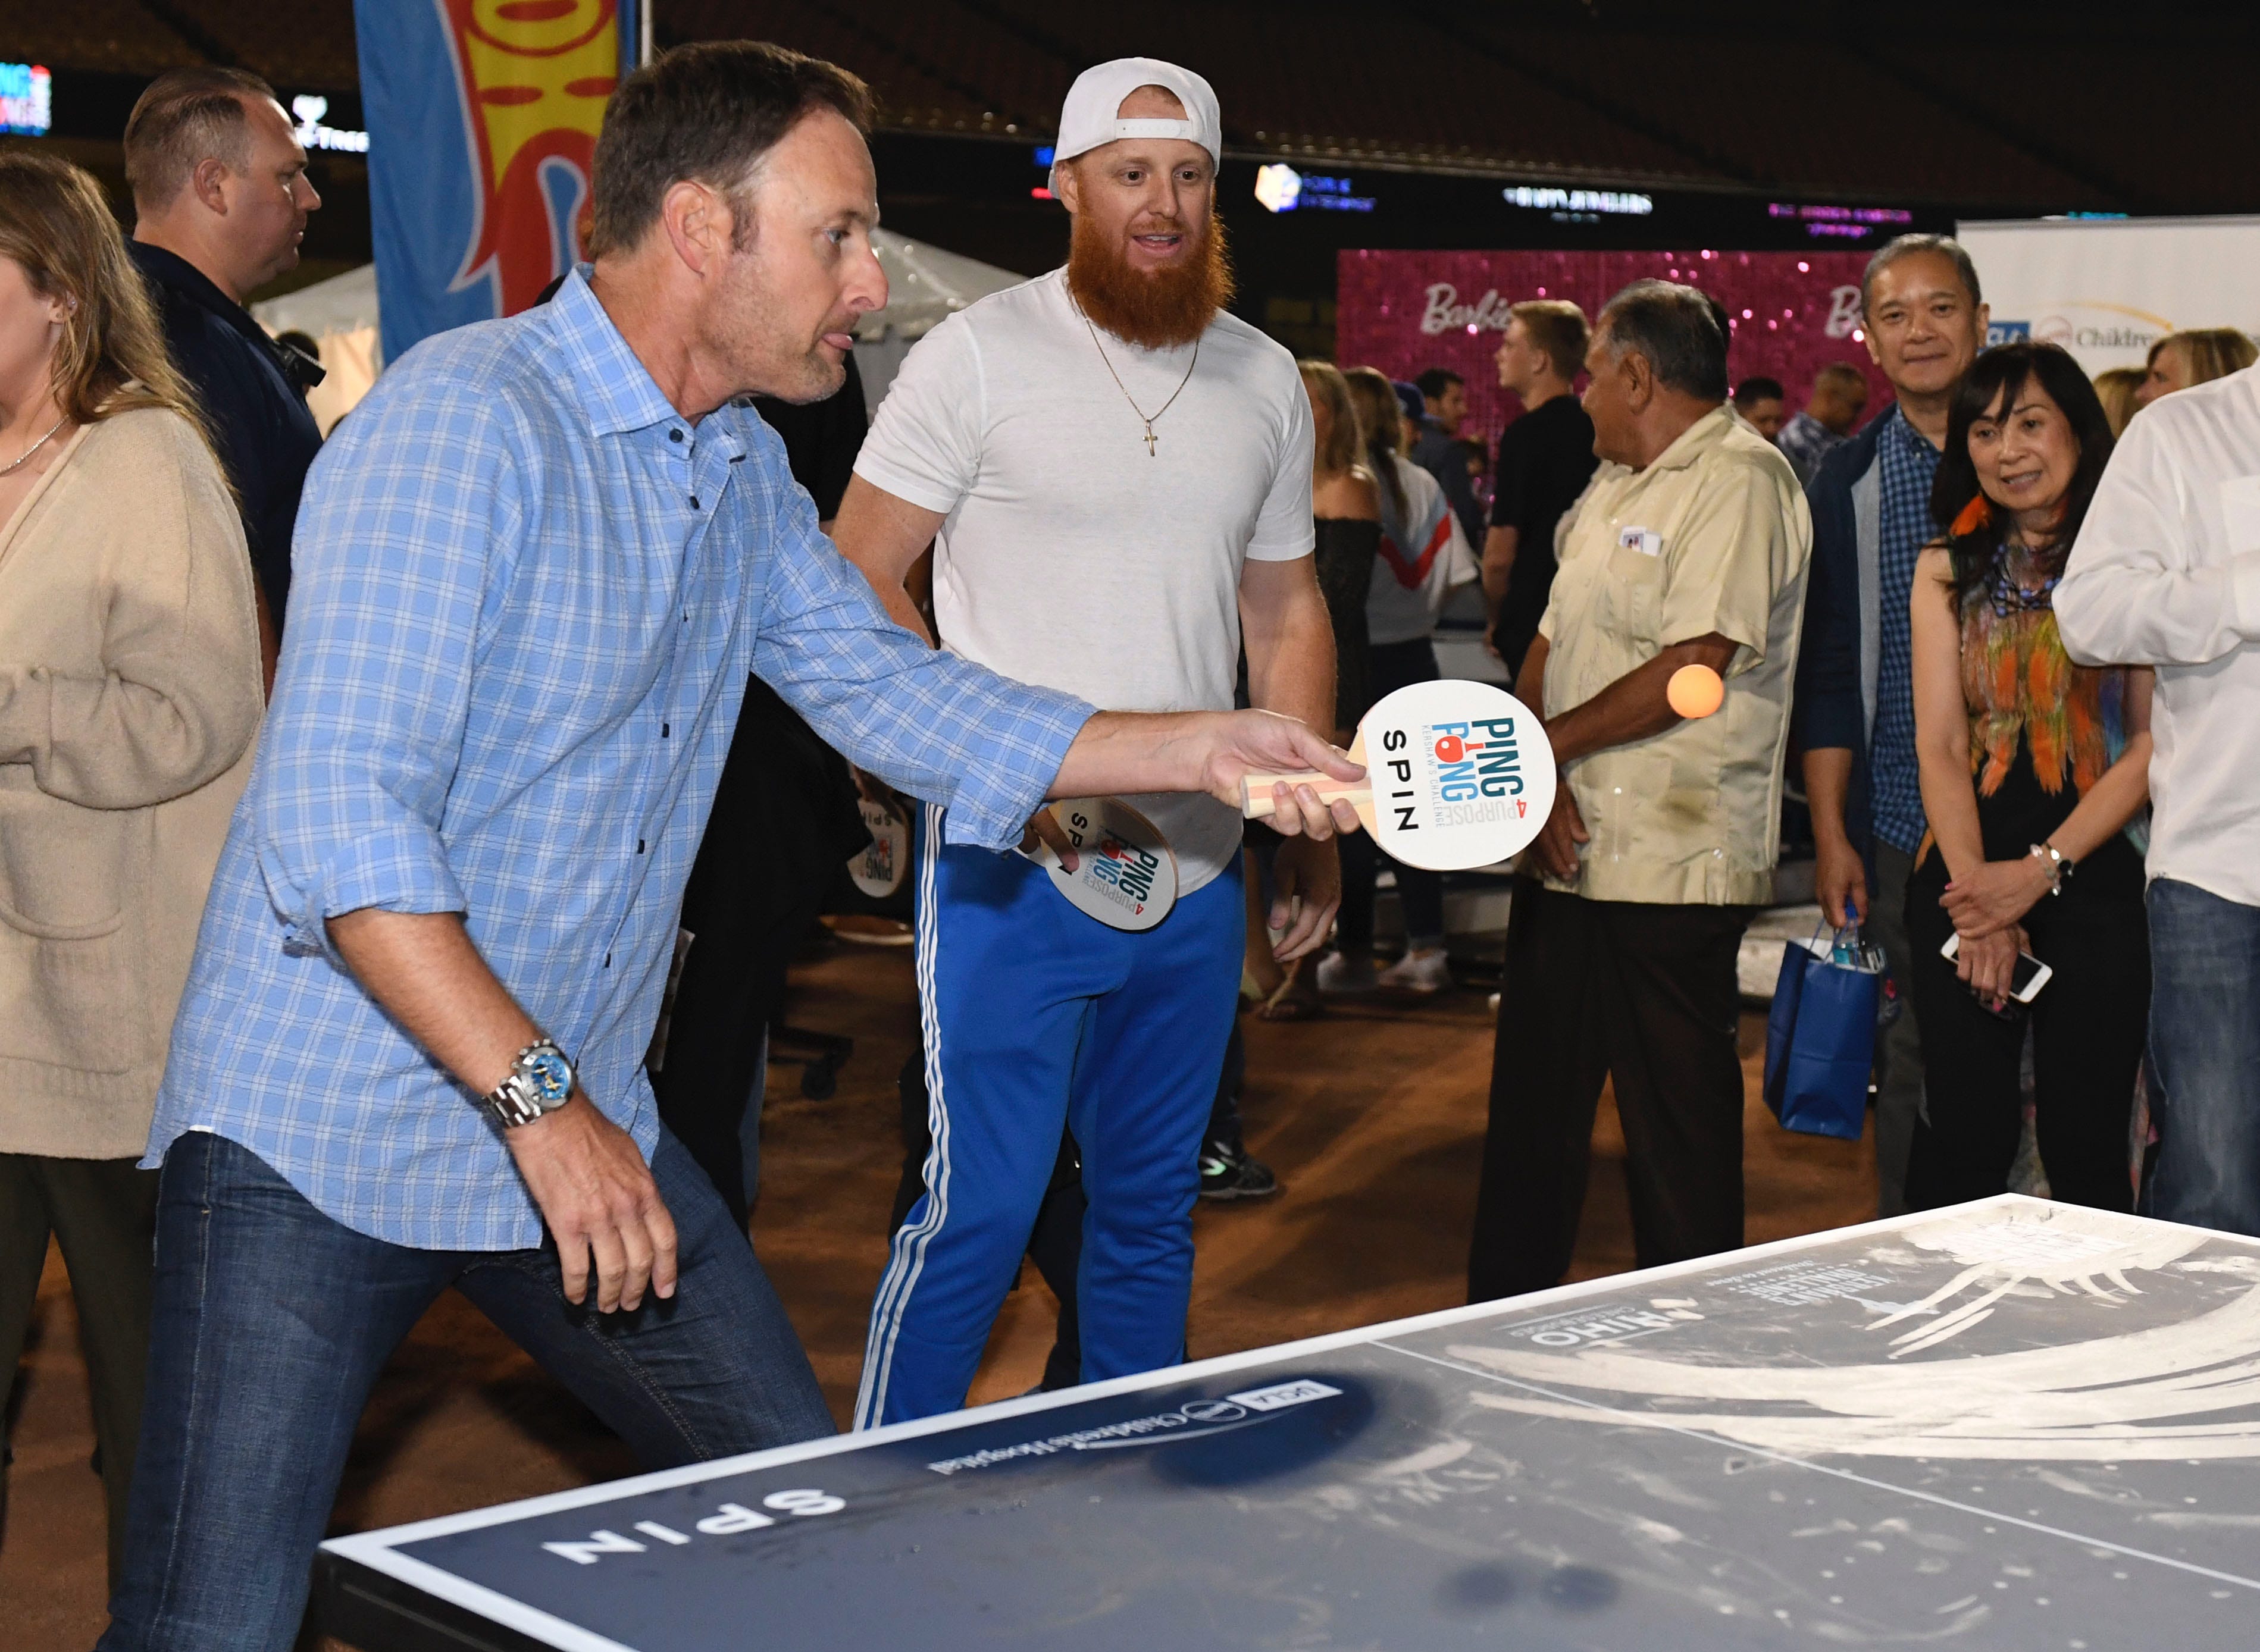 Clayton Kershaw and Family Attend Charity Ping Pong Tournament